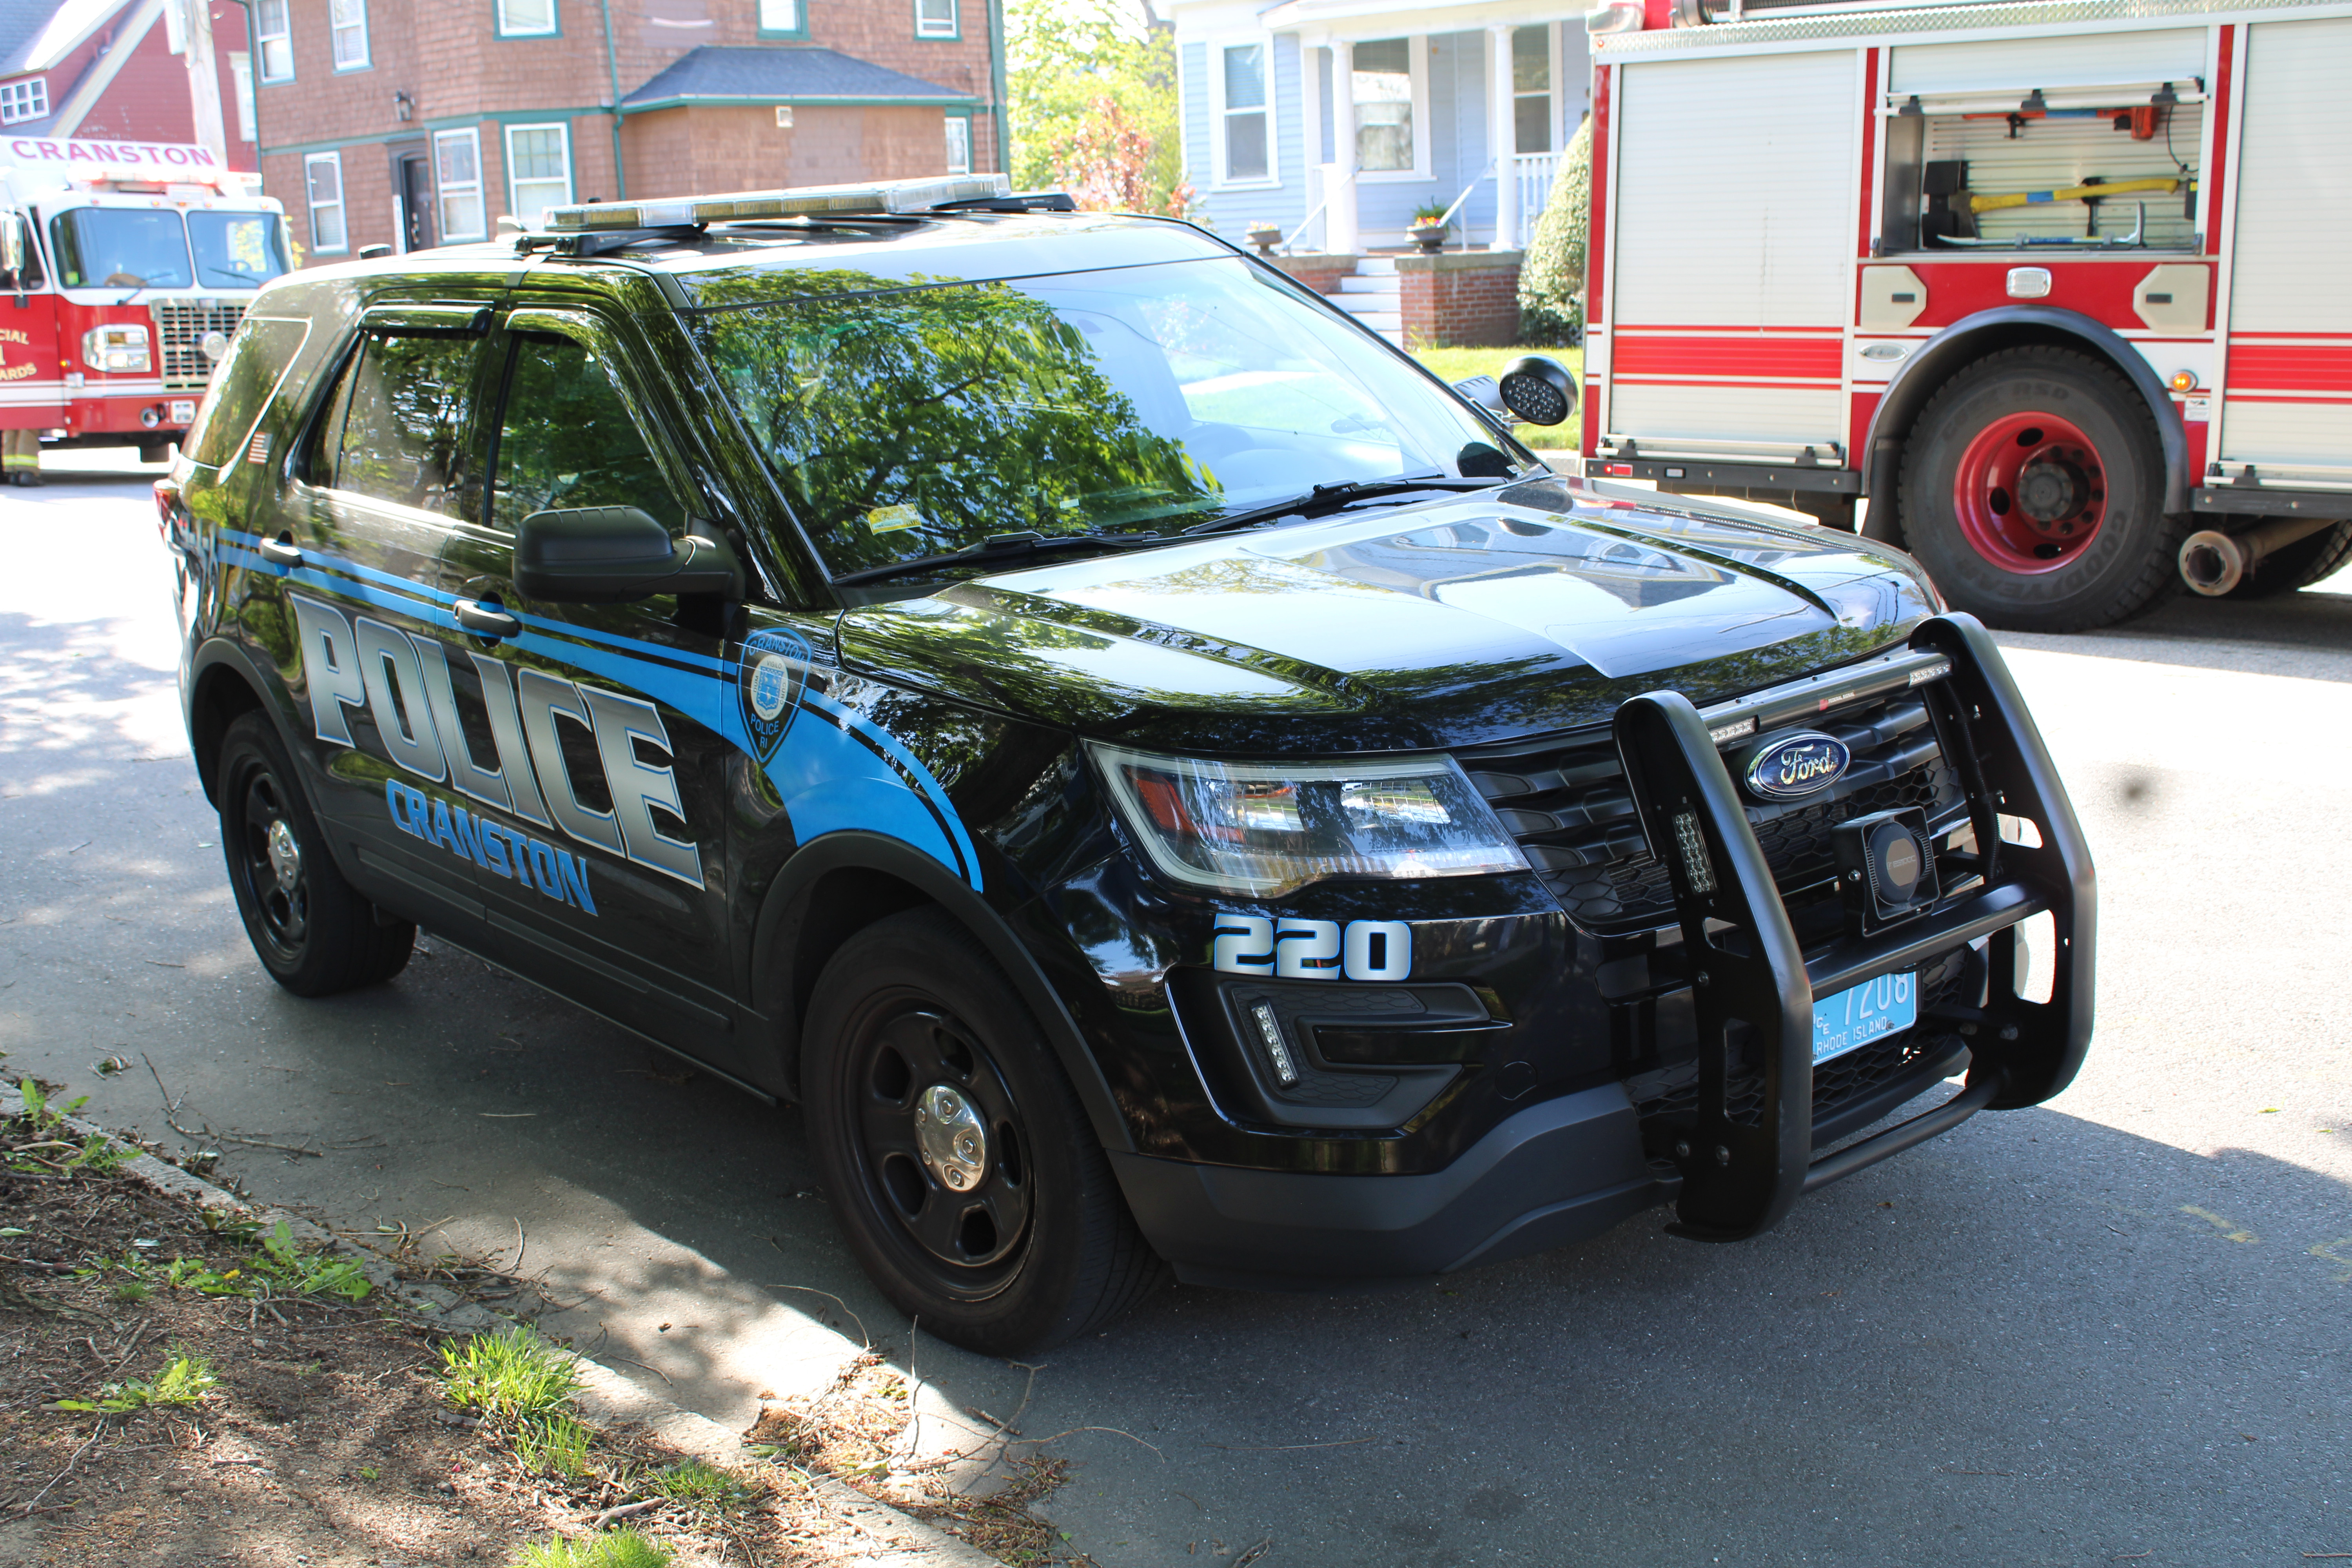 A photo  of Cranston Police
            Cruiser 220, a 2019 Ford Police Interceptor Utility             taken by @riemergencyvehicles